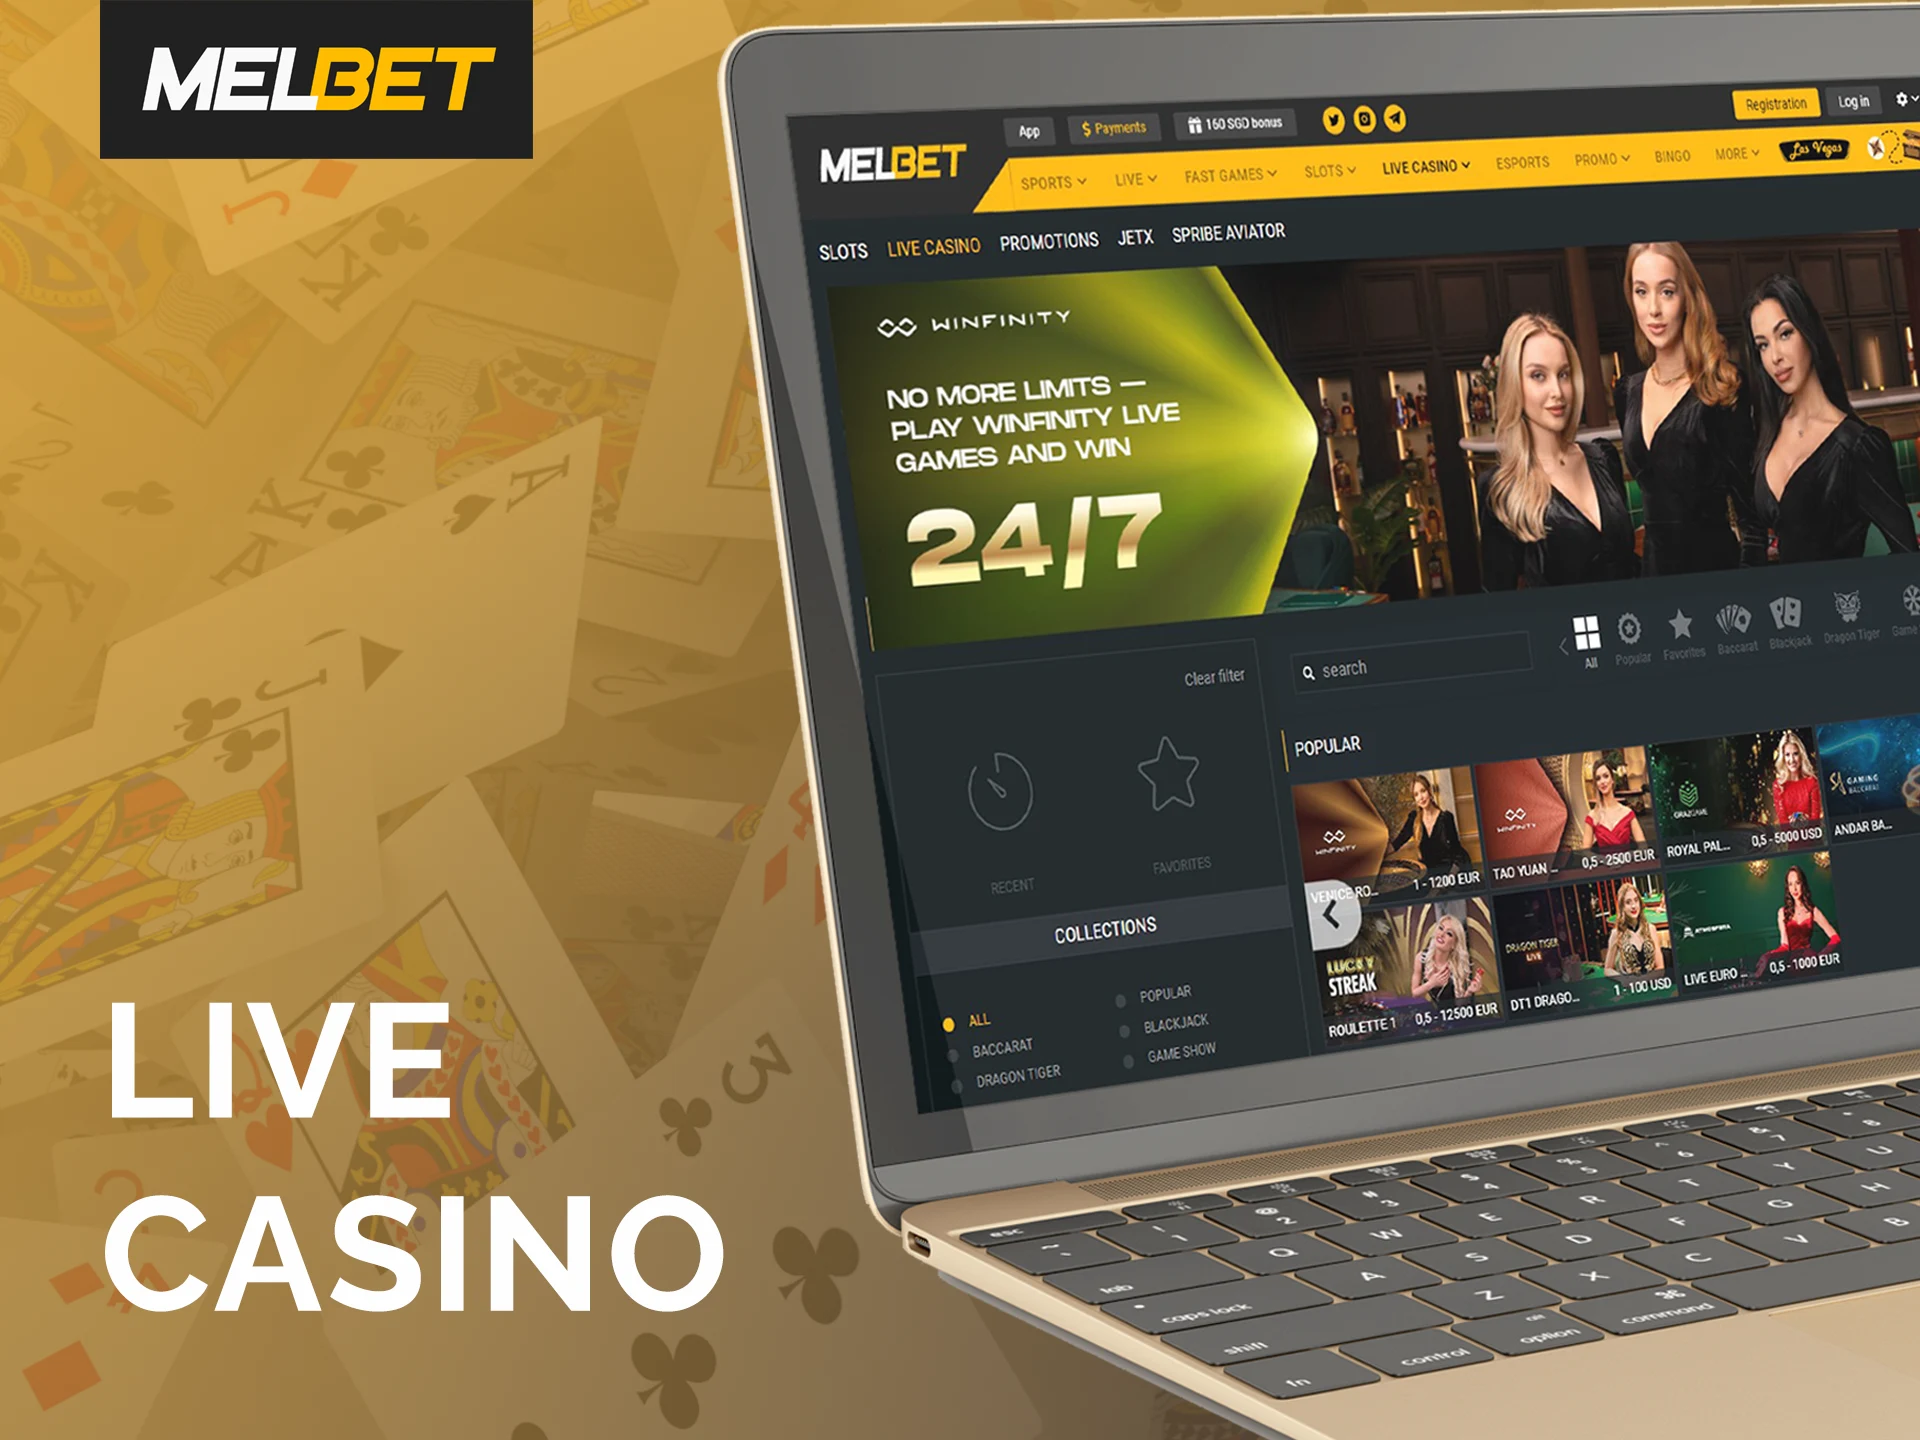 Go to the live casino section and have an exciting gaming experience.